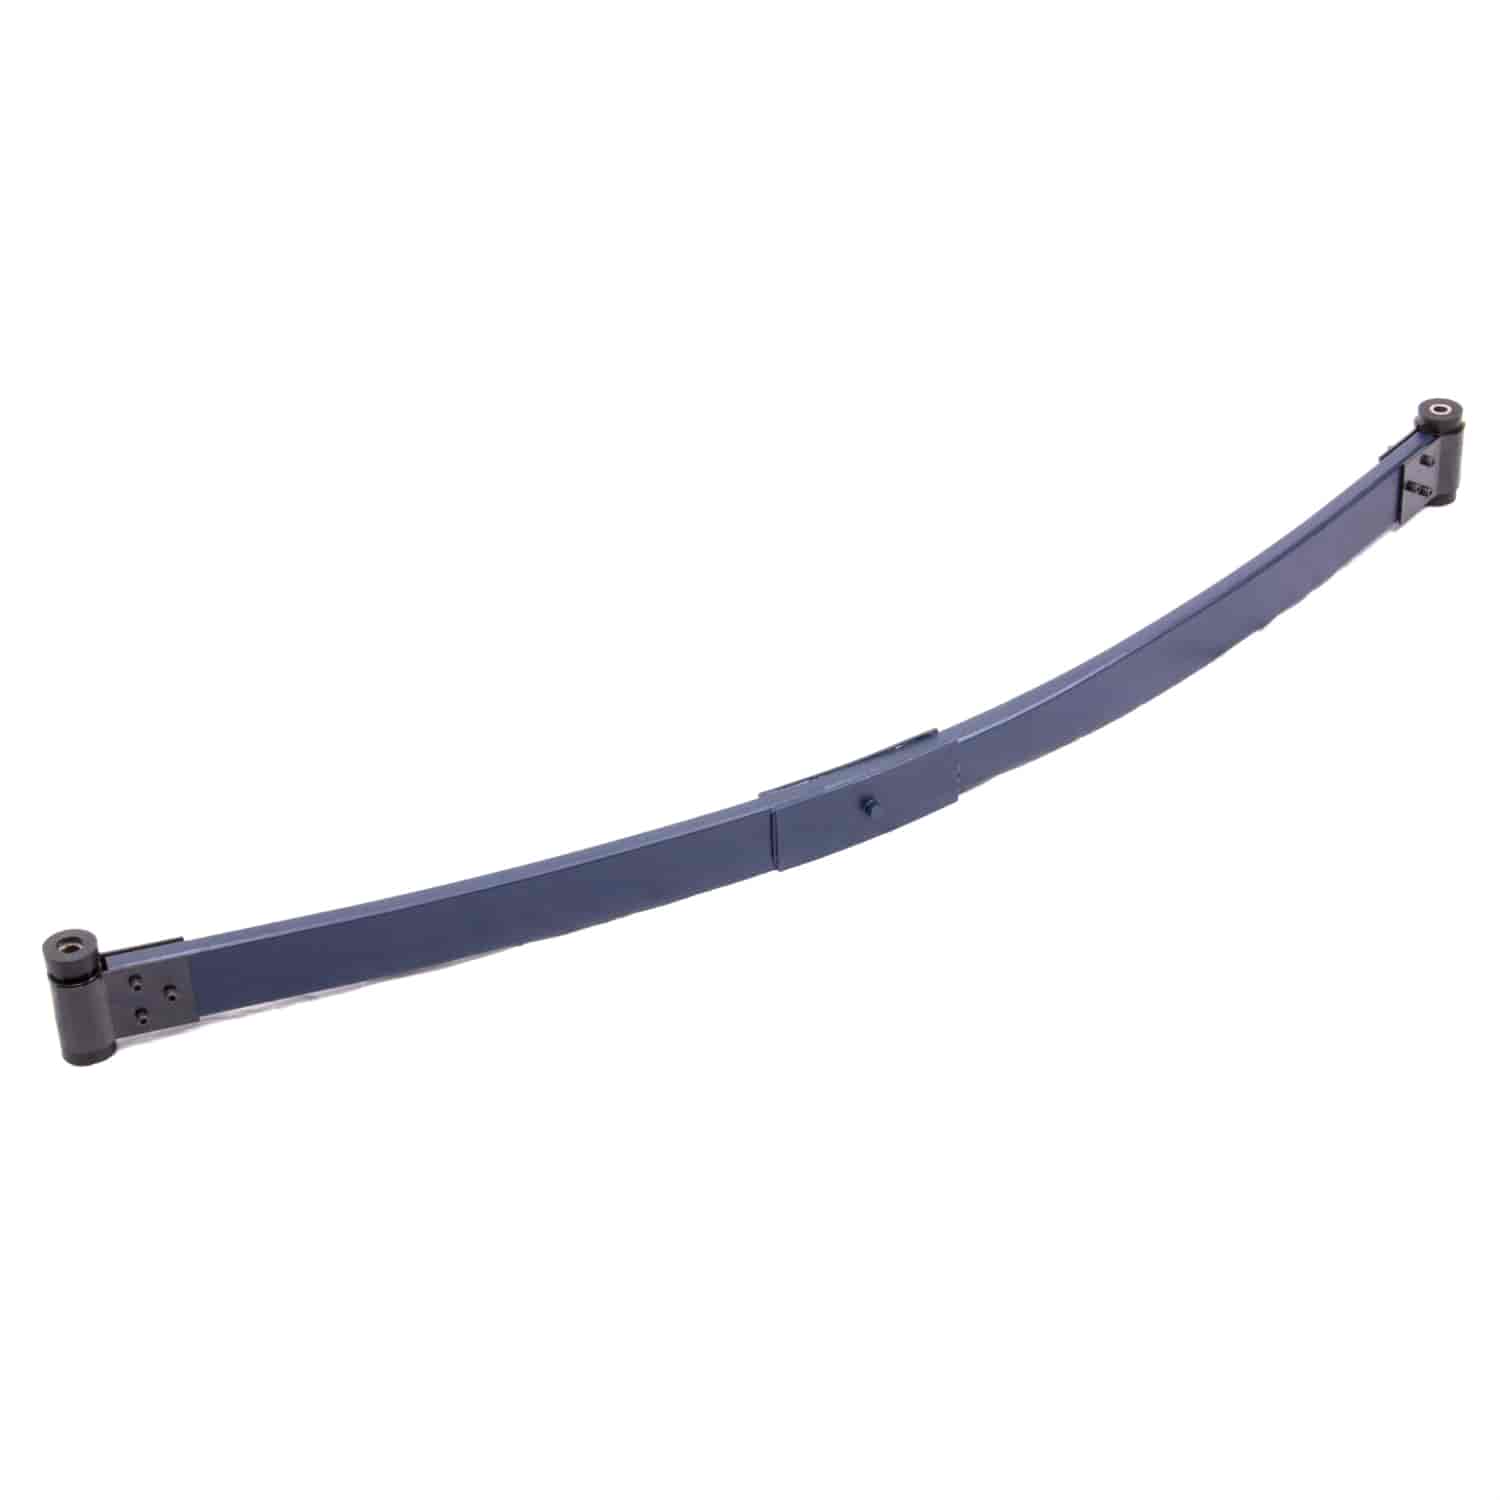 Composite Leaf Spring GM Style - 175 lbs.